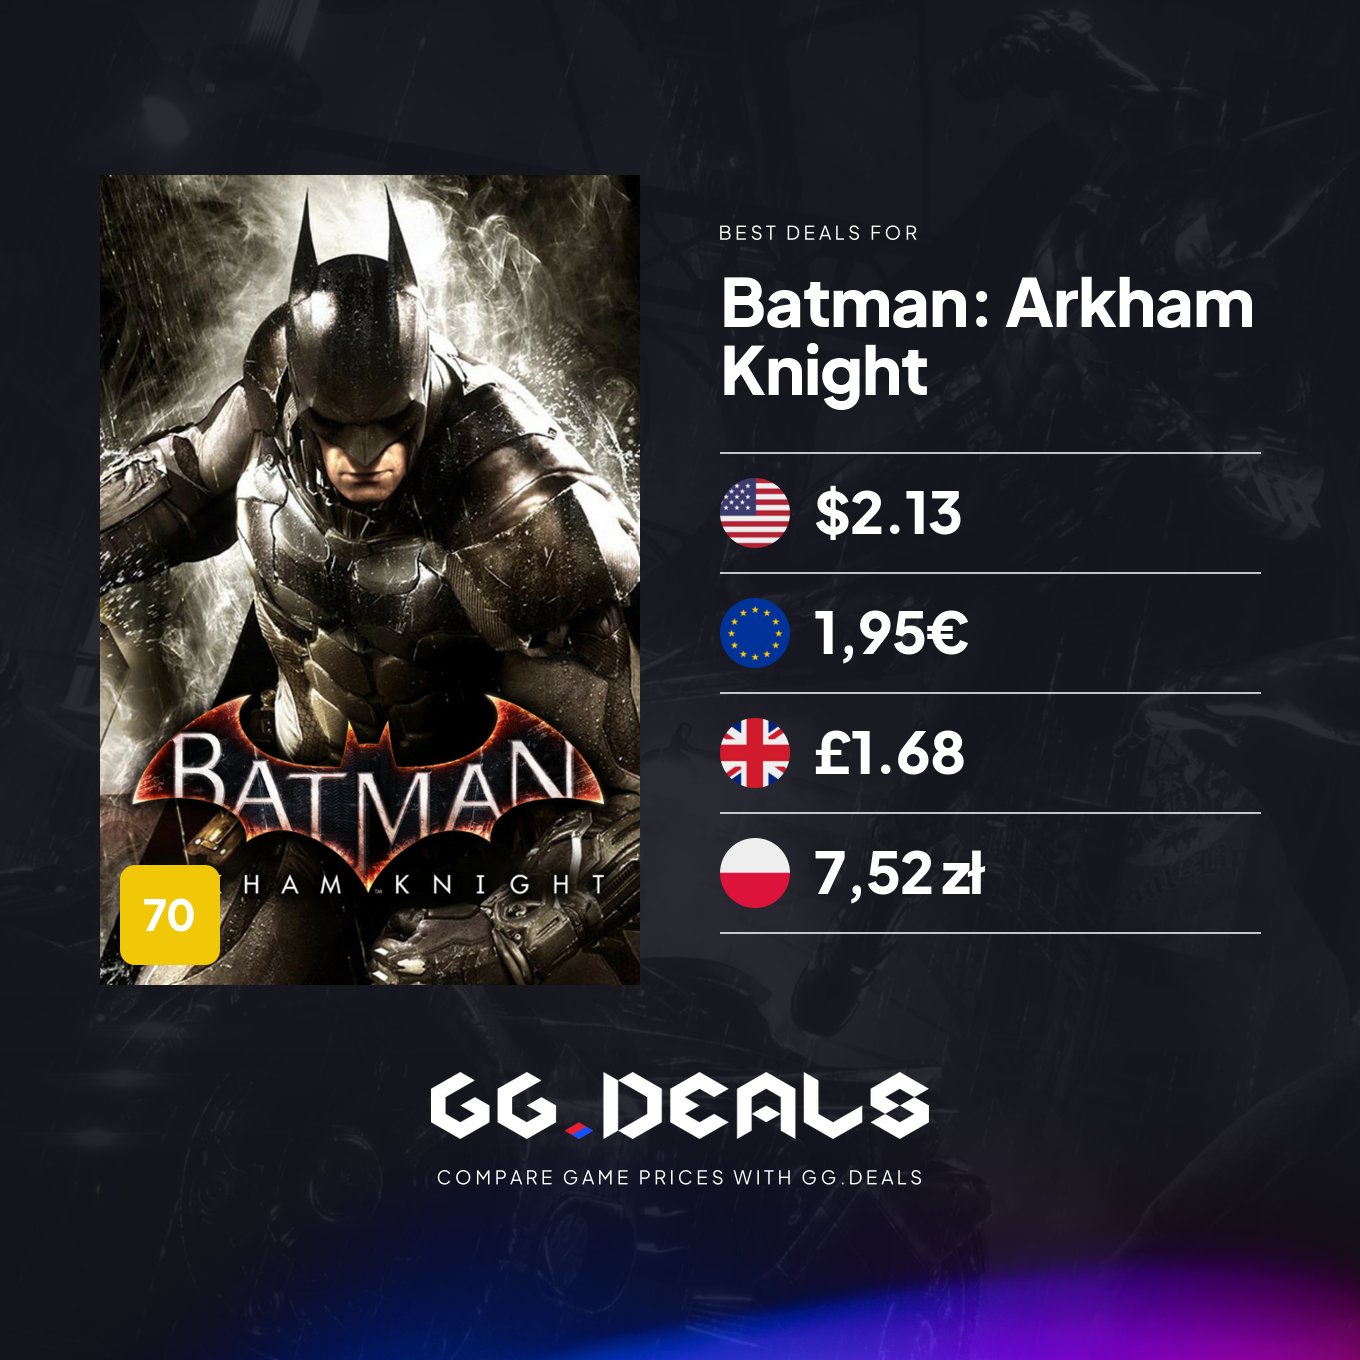 monarki Pub Lilla GG.deals on Twitter: "It's been 8 years since the release of Batman: Arkham  Knight. 🎂 What a nice occasion to revisit this splendid title or play it  for the first time. Especially